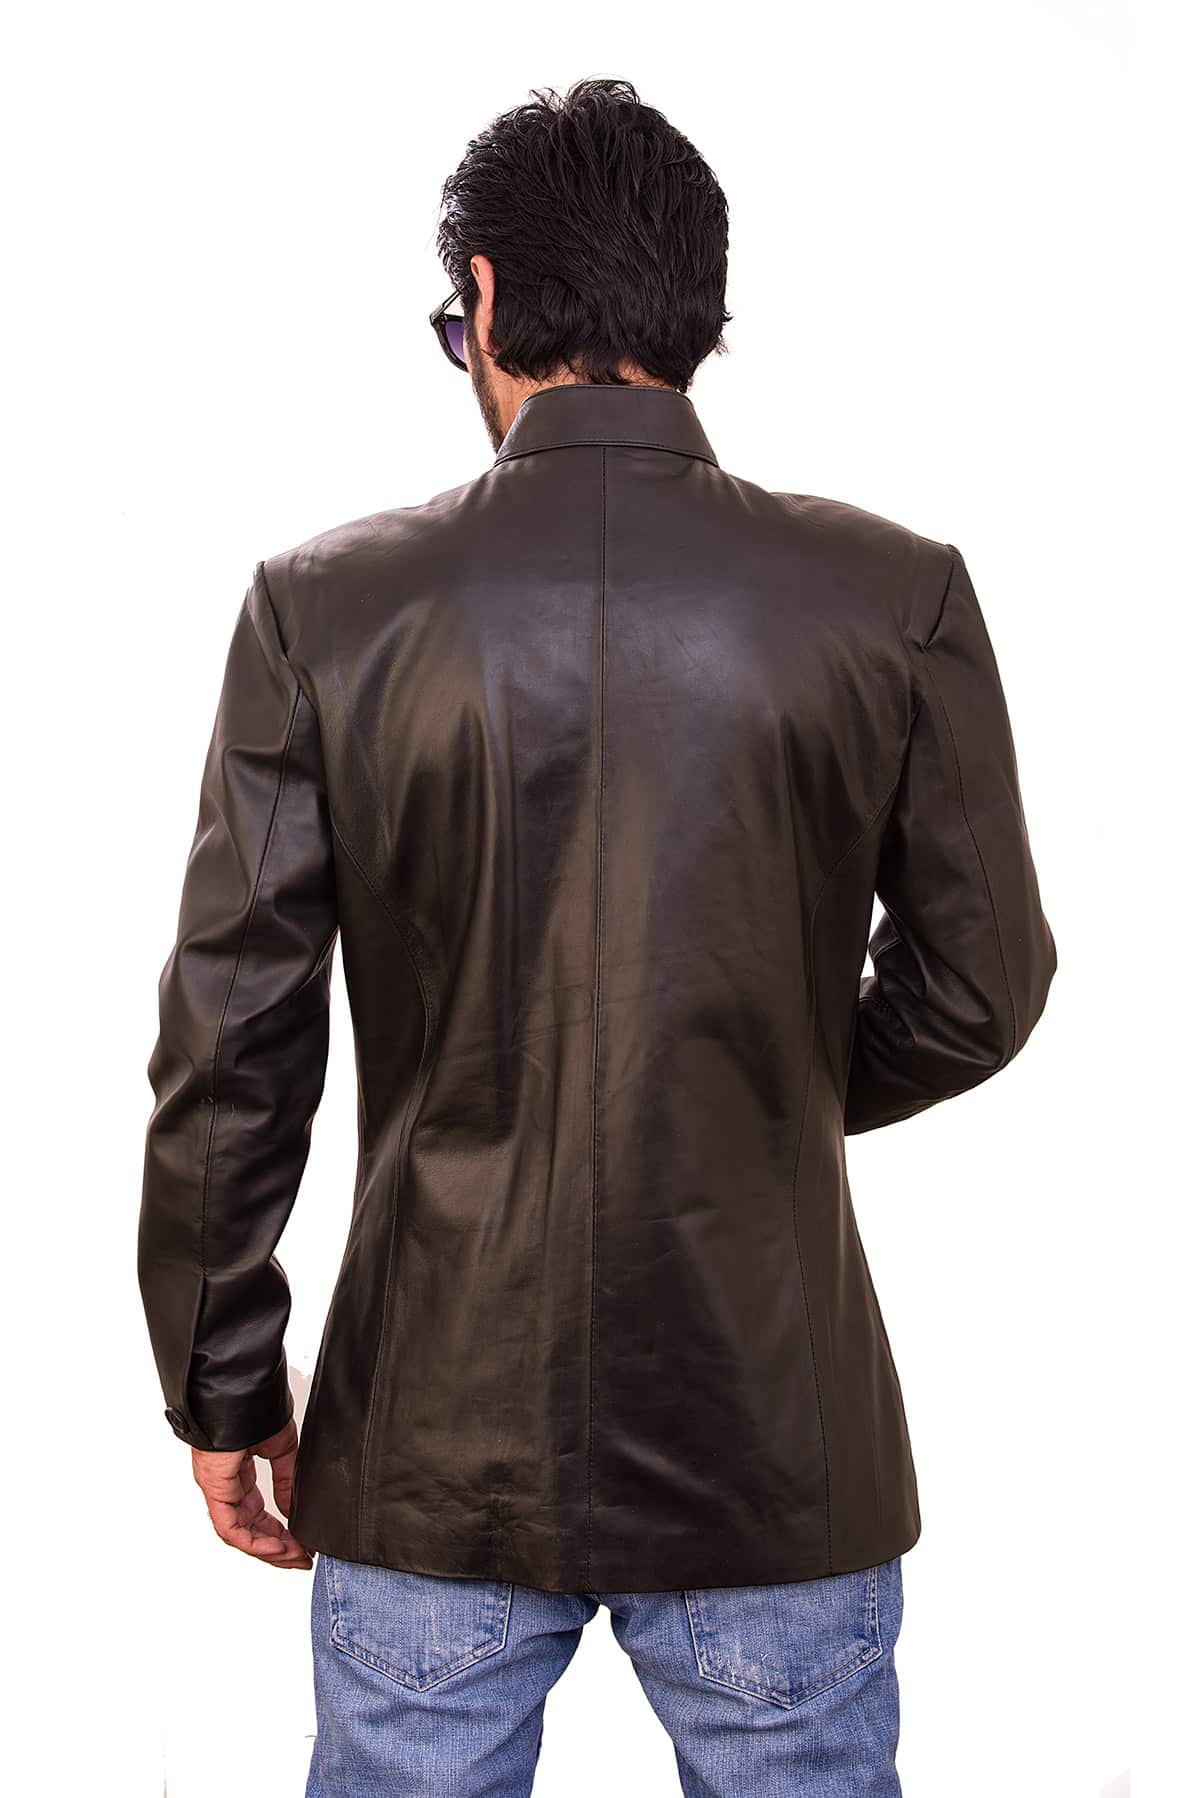 real leather jacket cost